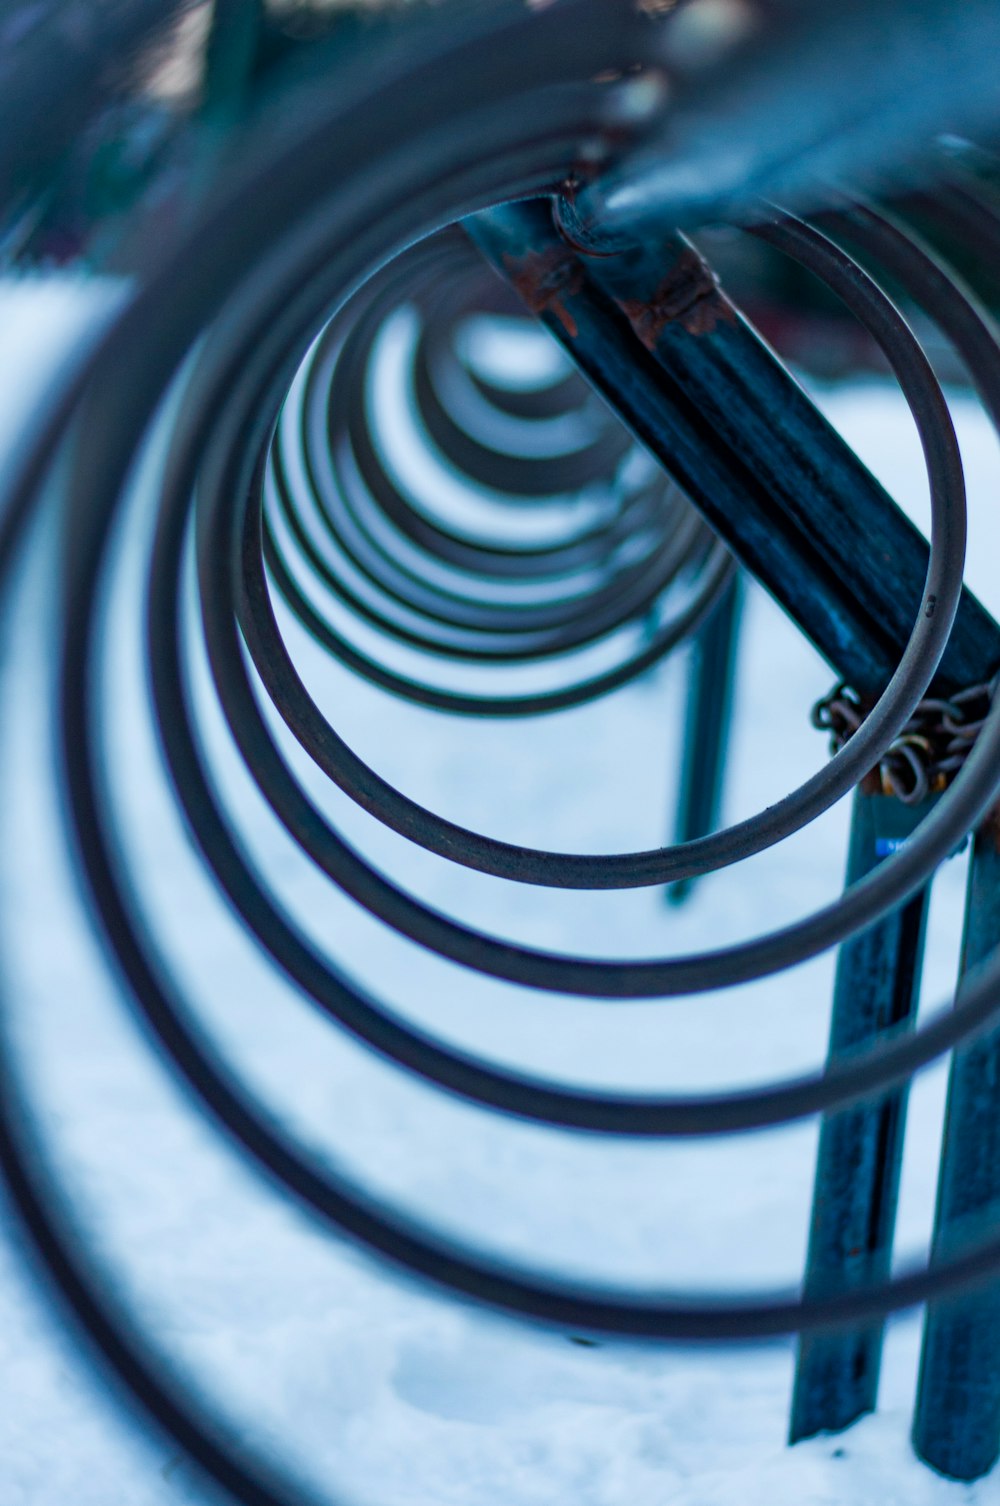 black metal spiral staircase in close up photography